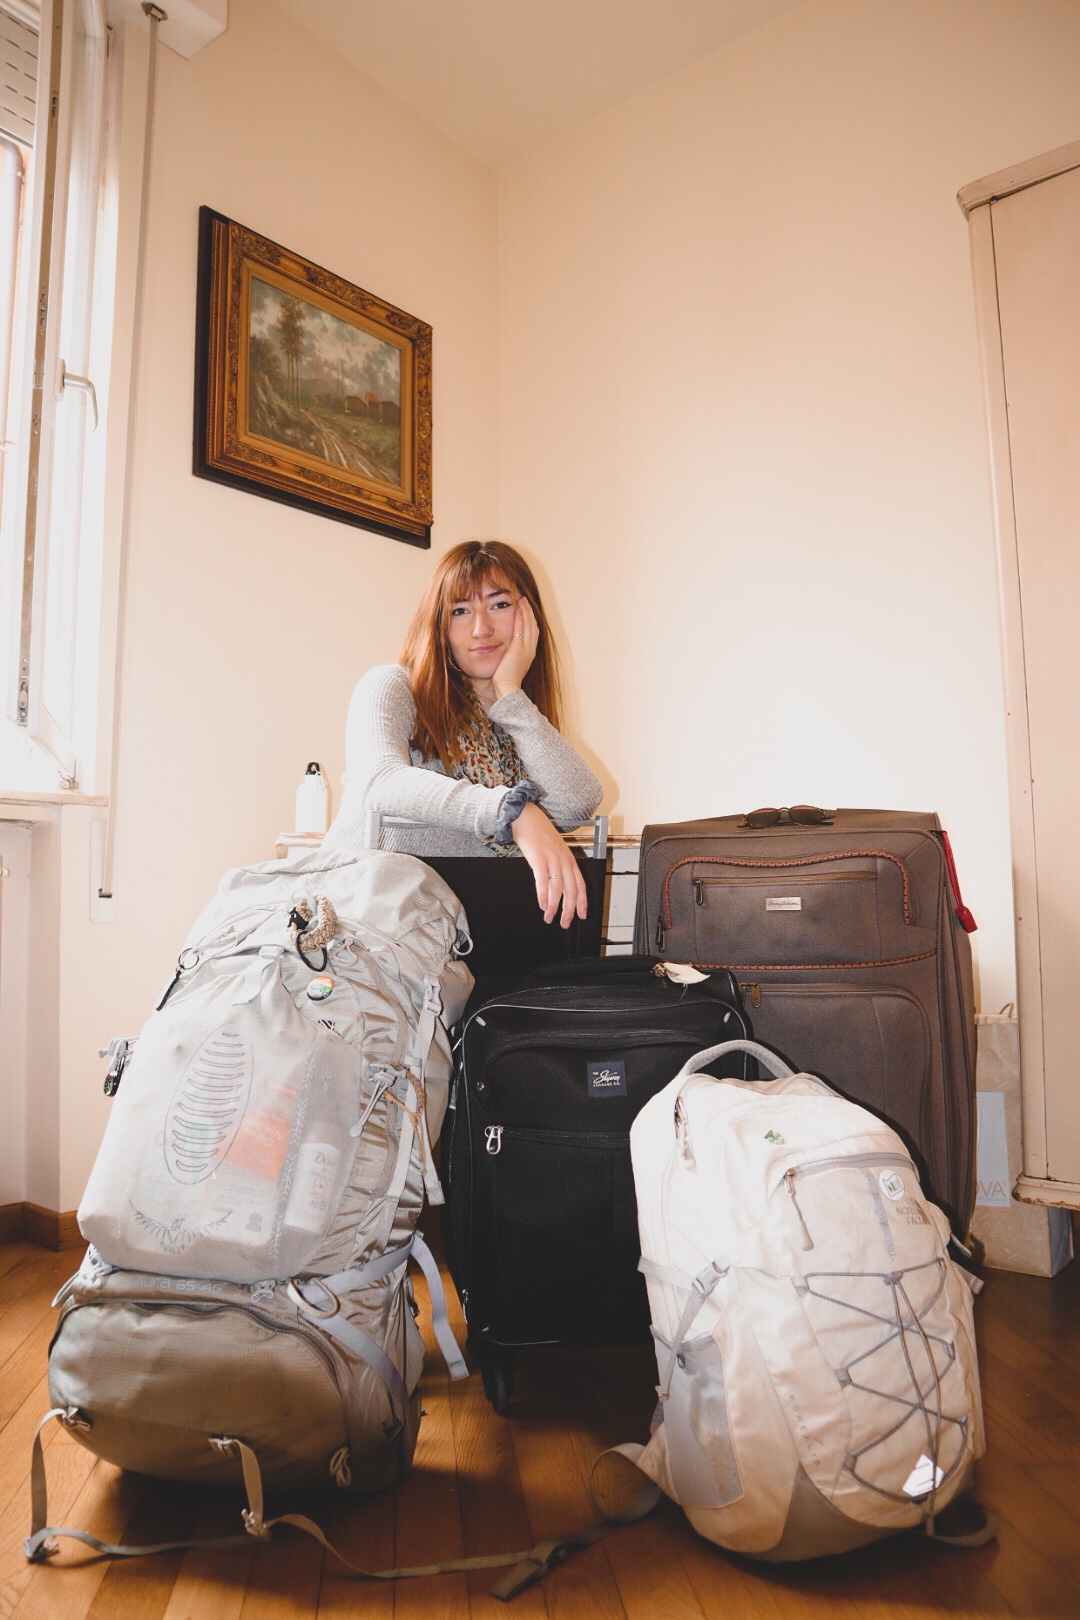 Girl in her room with all her luggage.